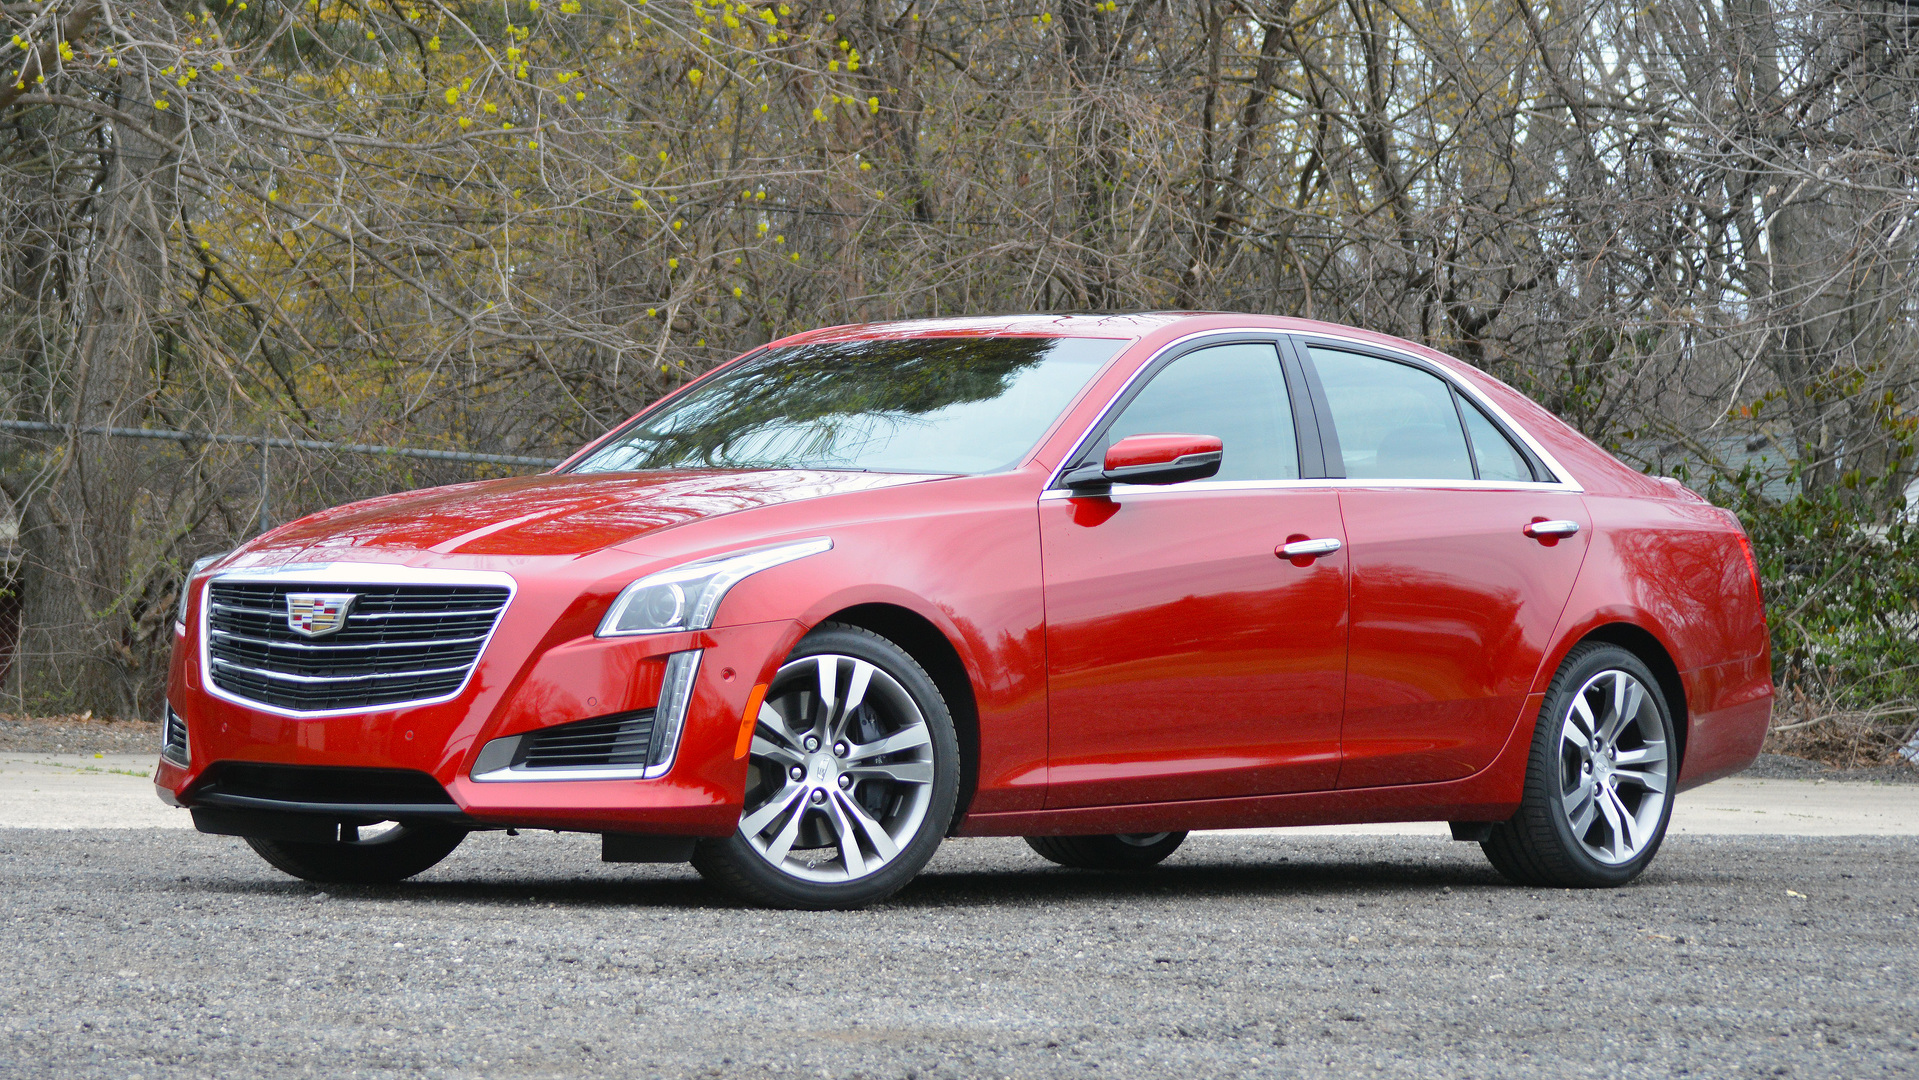 Cadillac CTS V-Sport Gets Spiced Up With Red Morello Edition